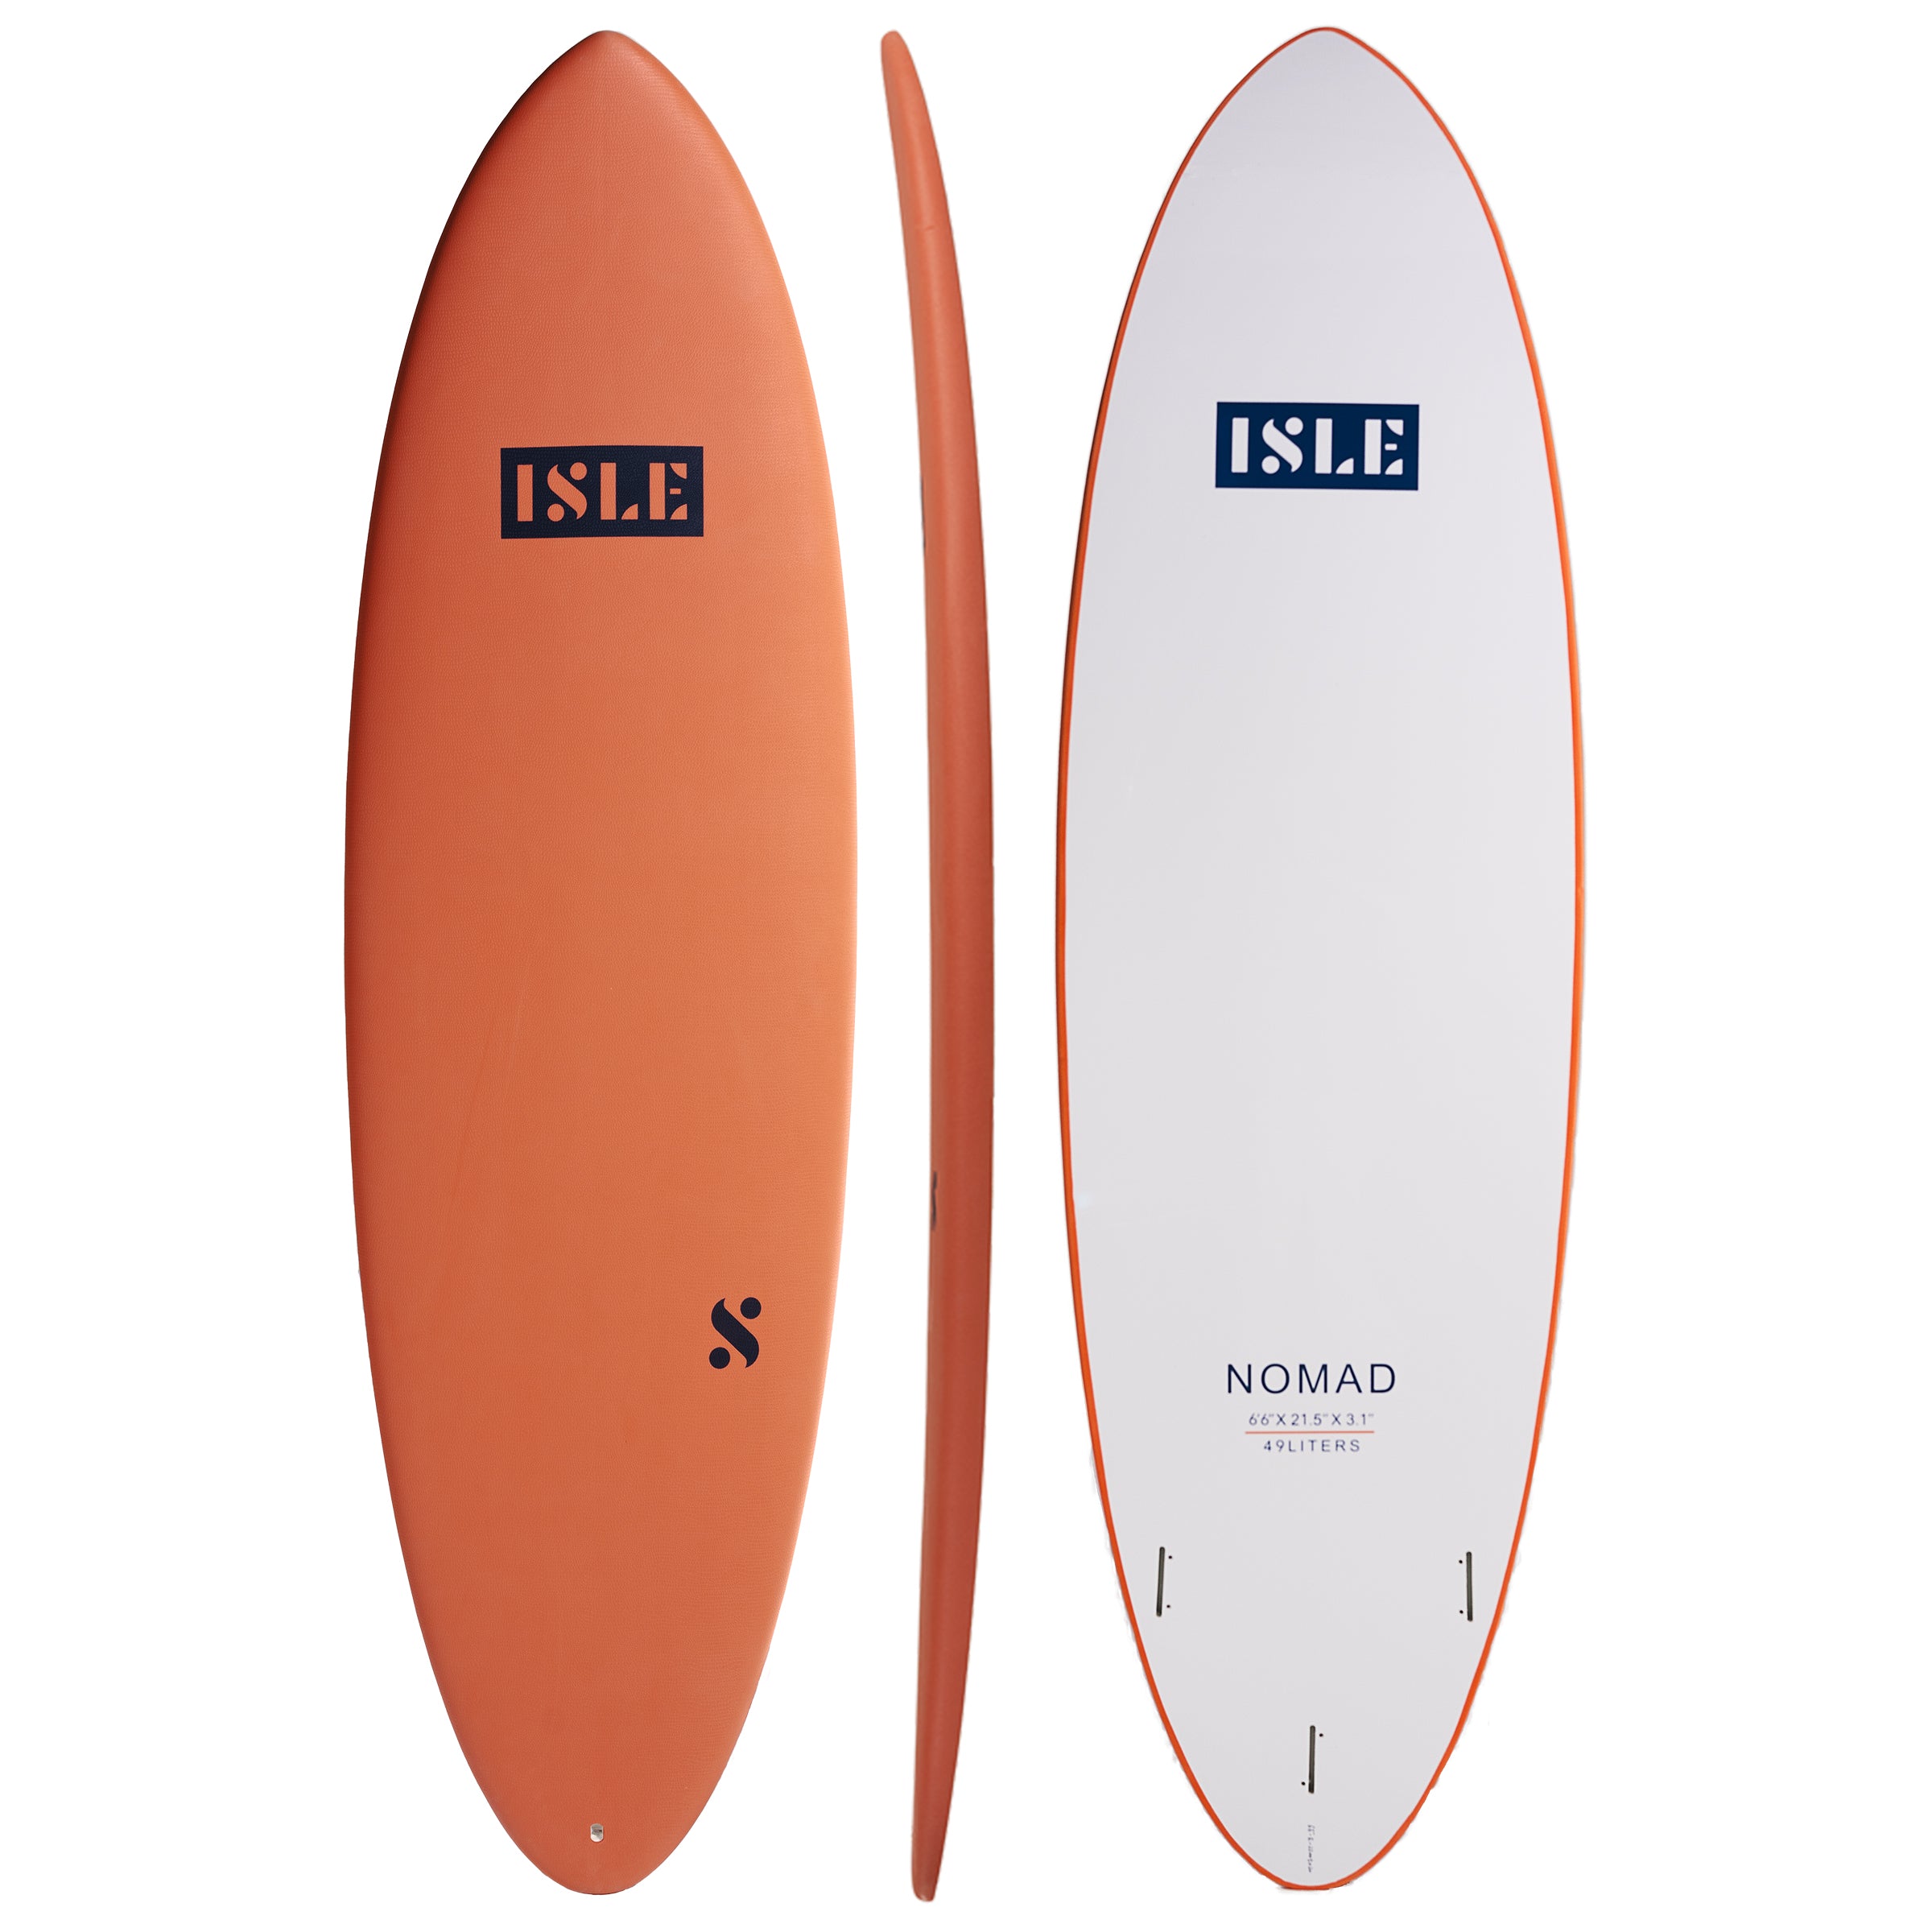 Nomad Soft Top Surfboard in Coral